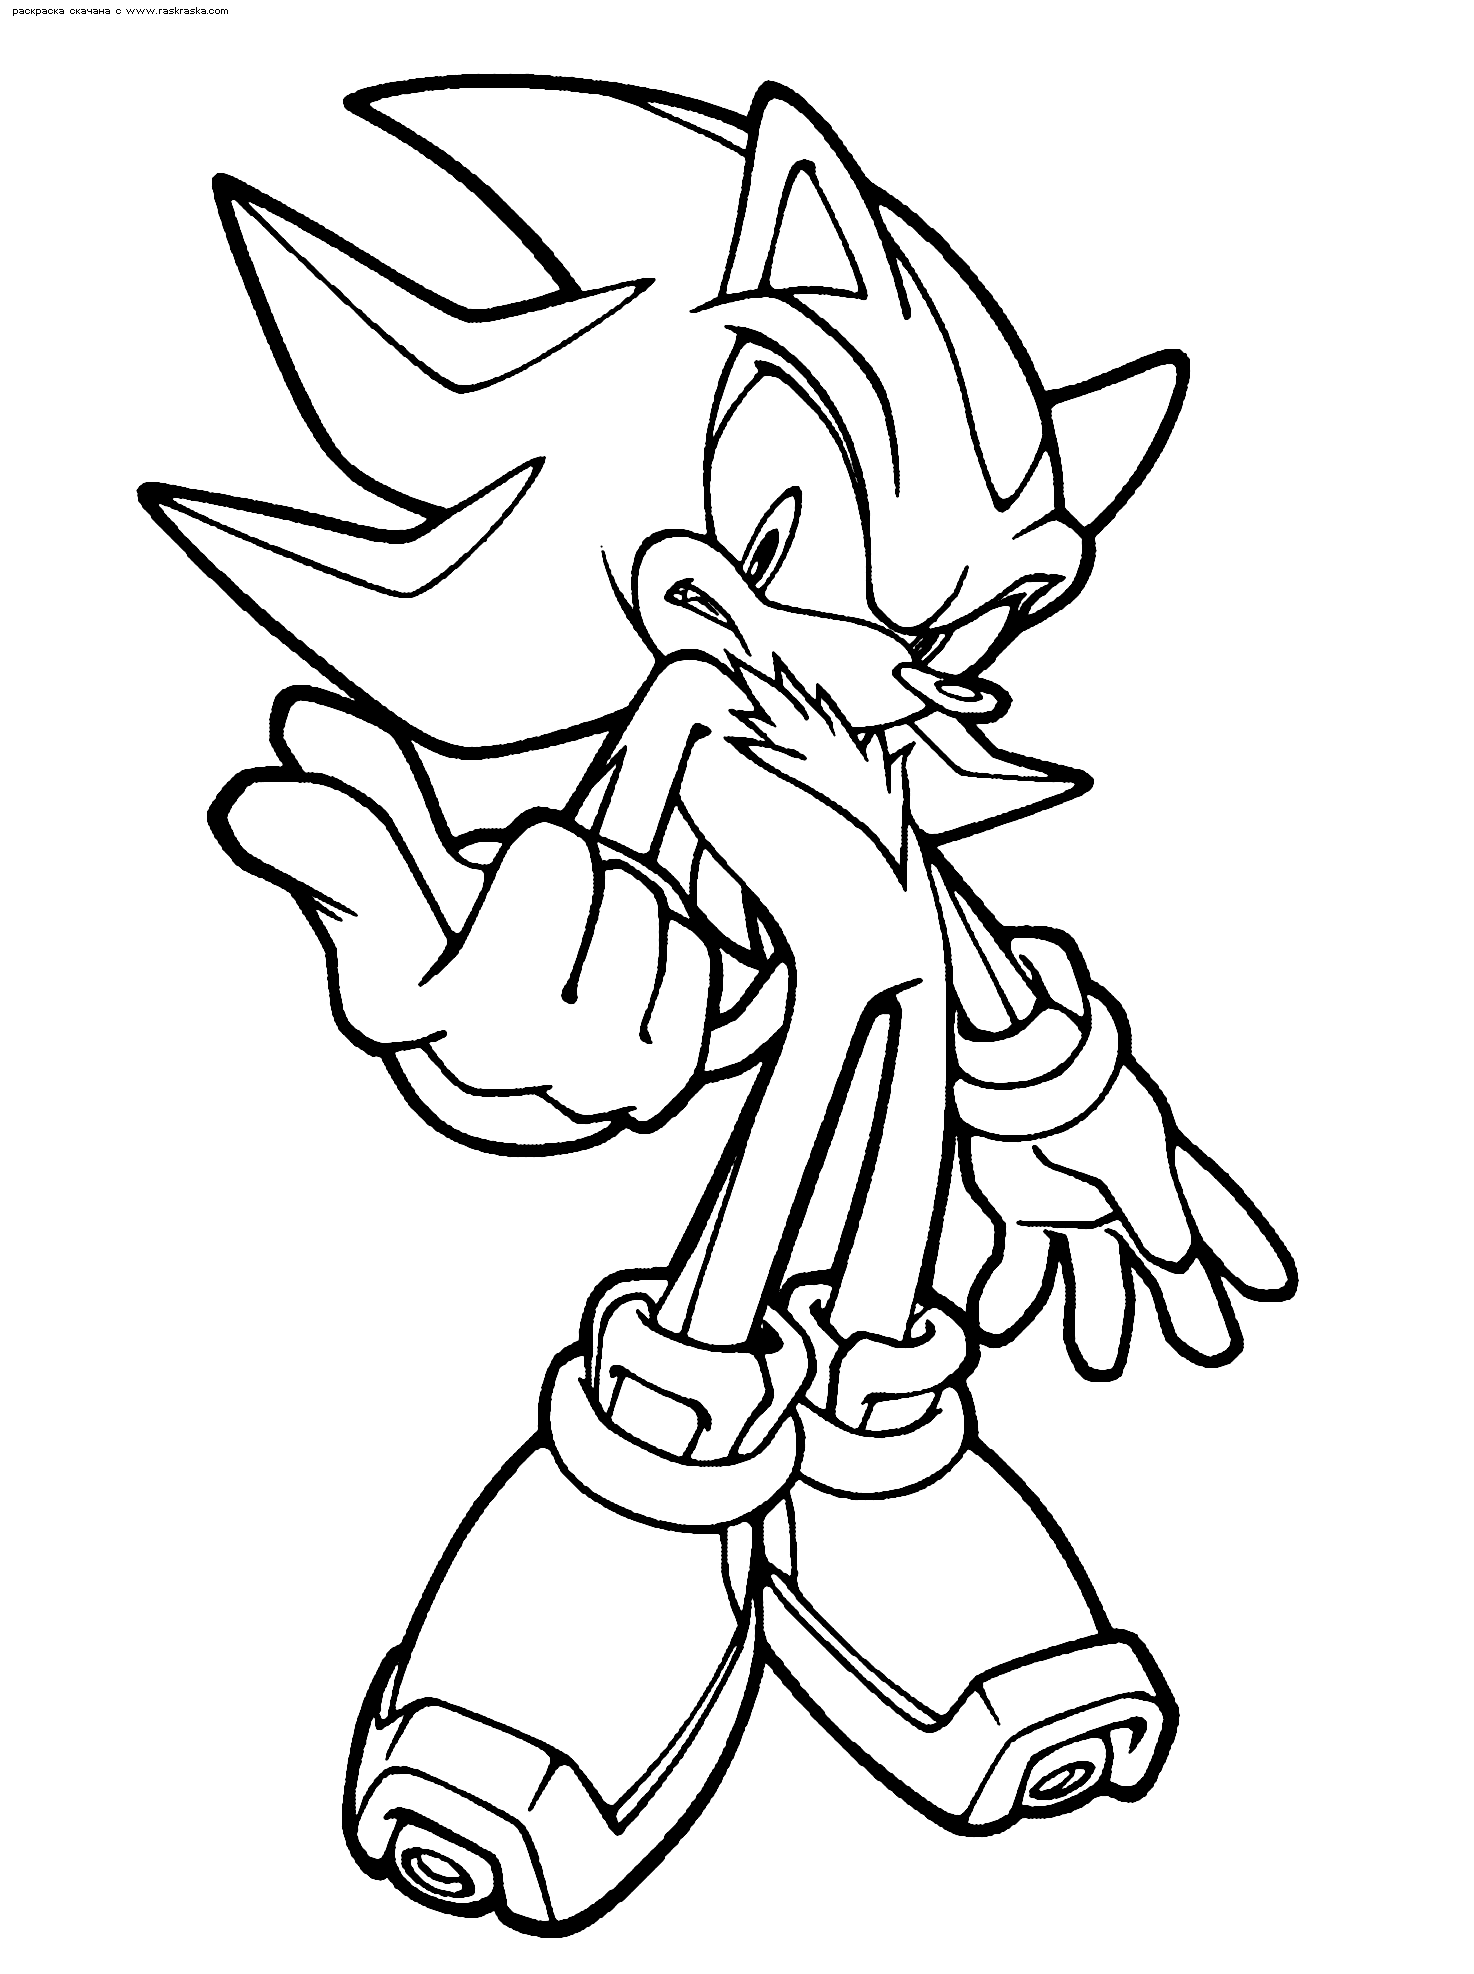 sonic color page | High Quality Coloring Pages